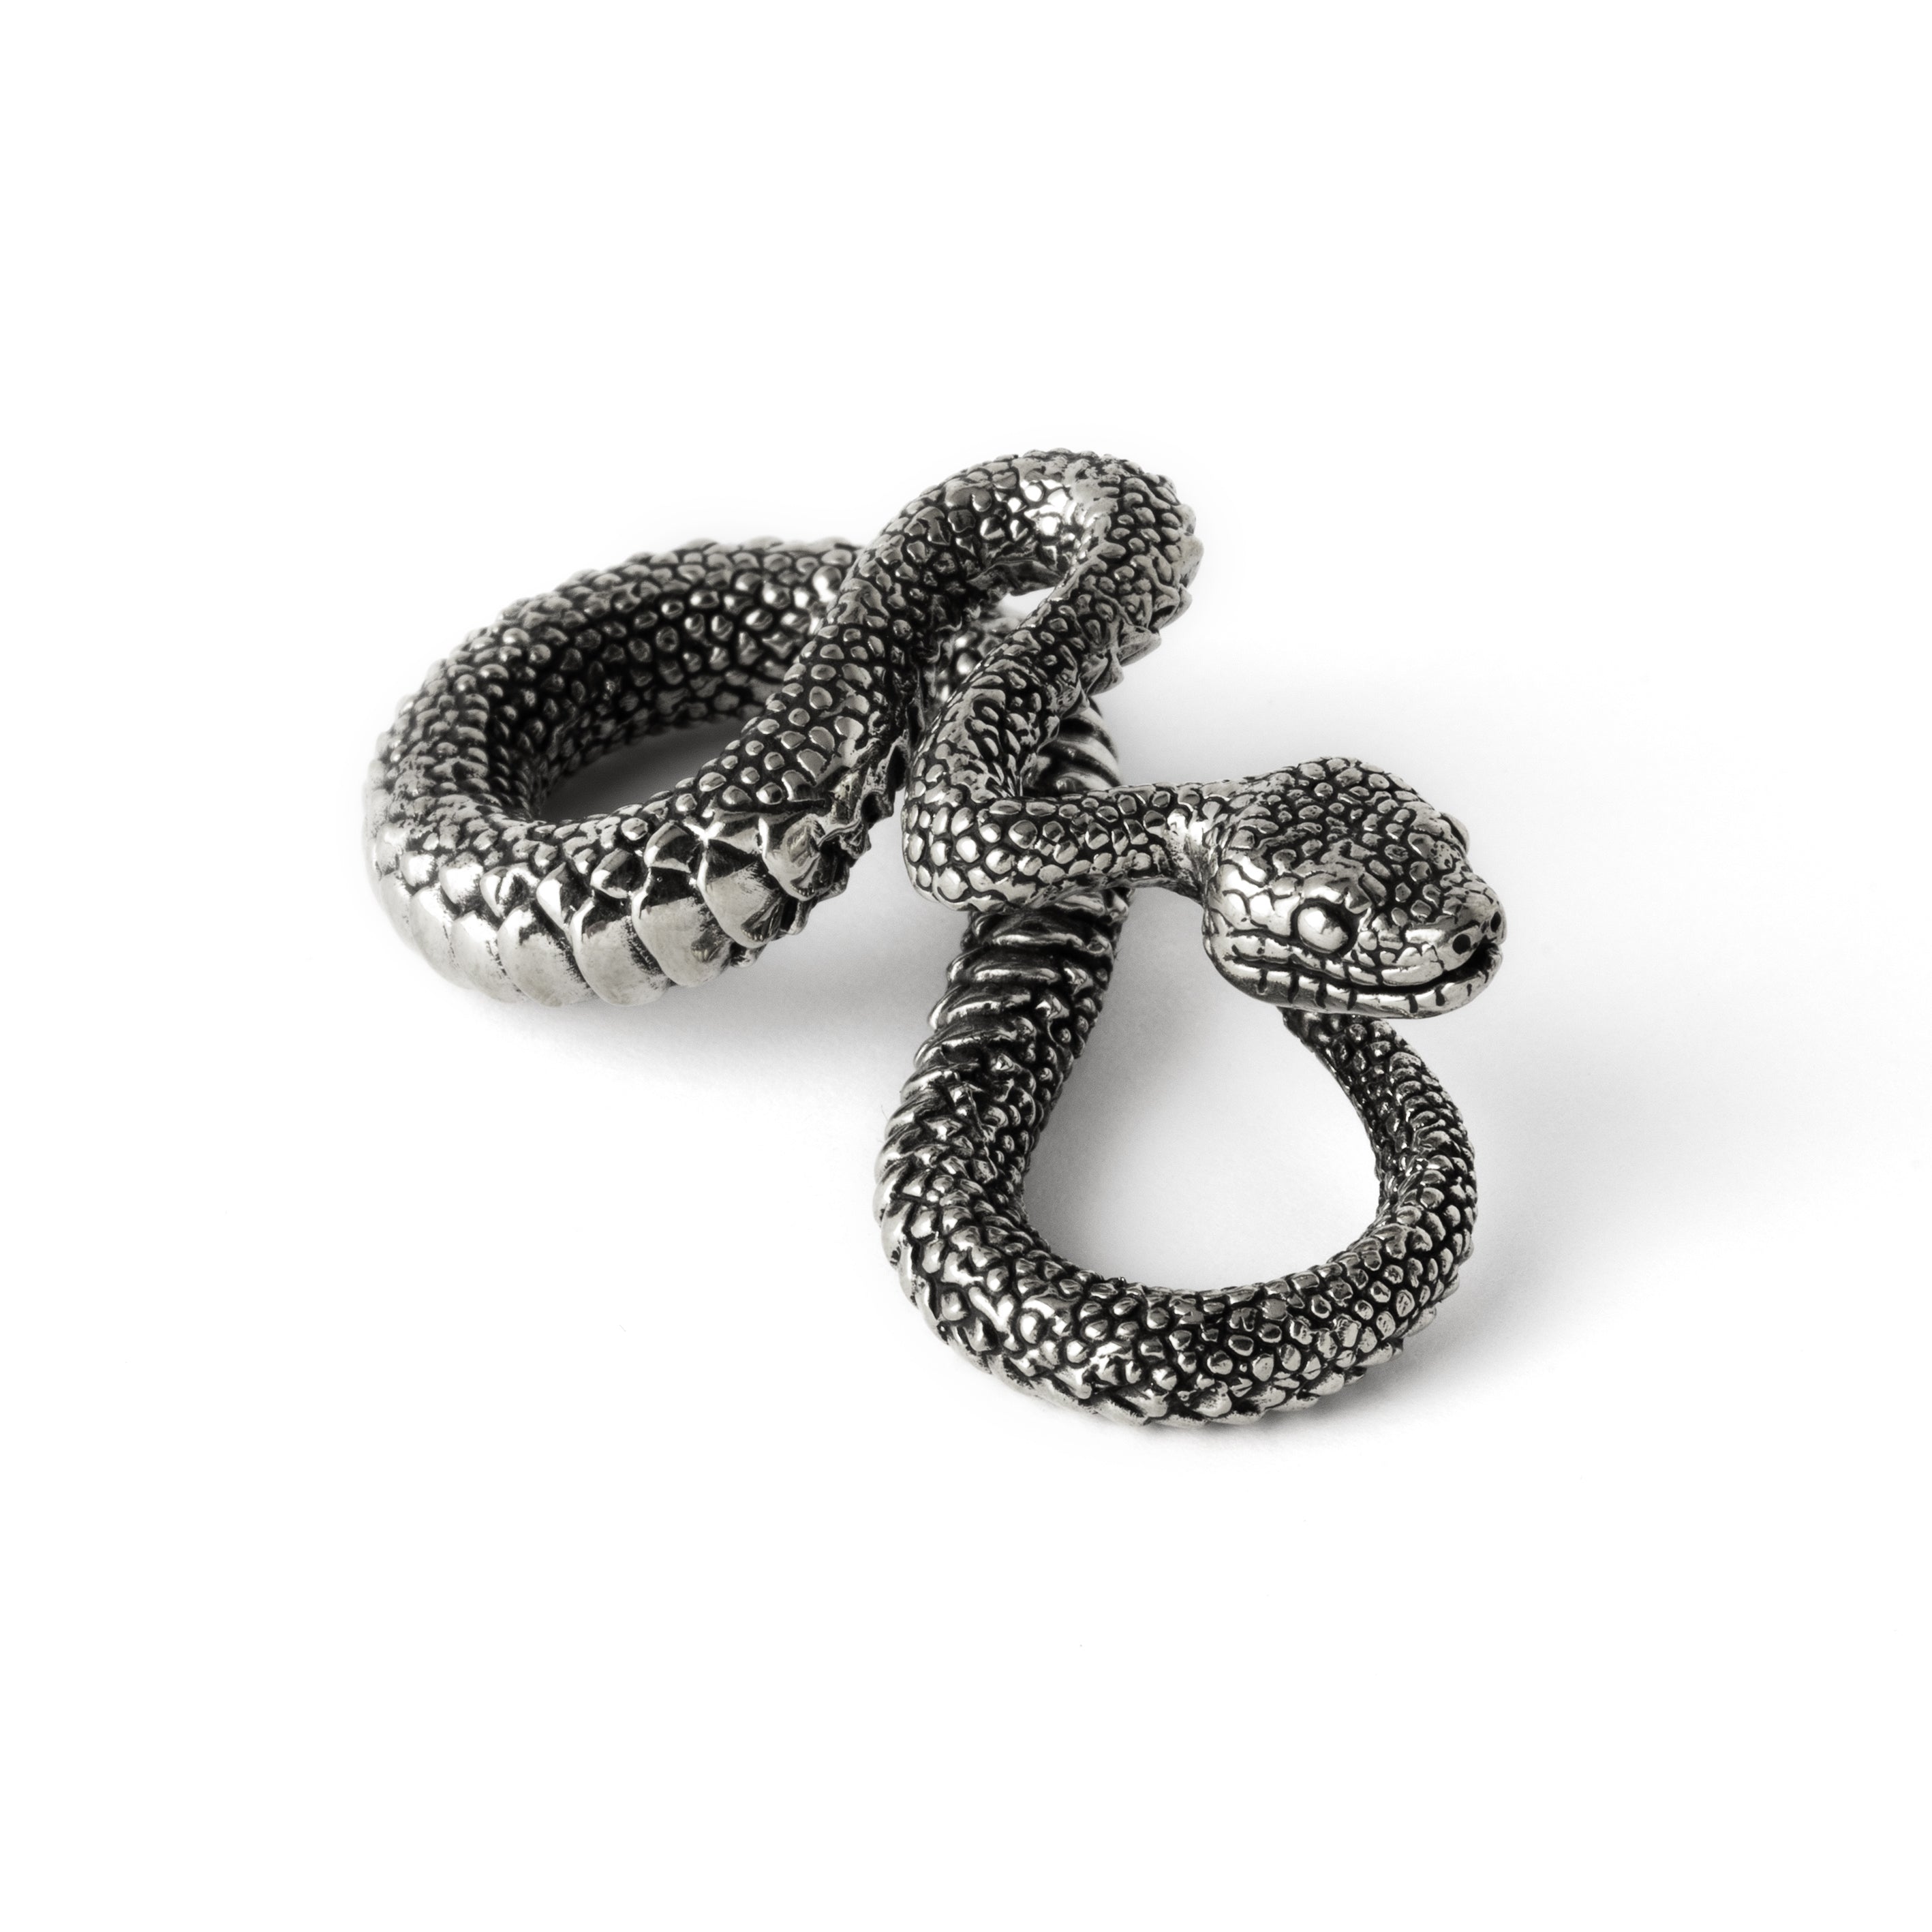 single silver brass snake ear weights hangers in infinity shape close up view